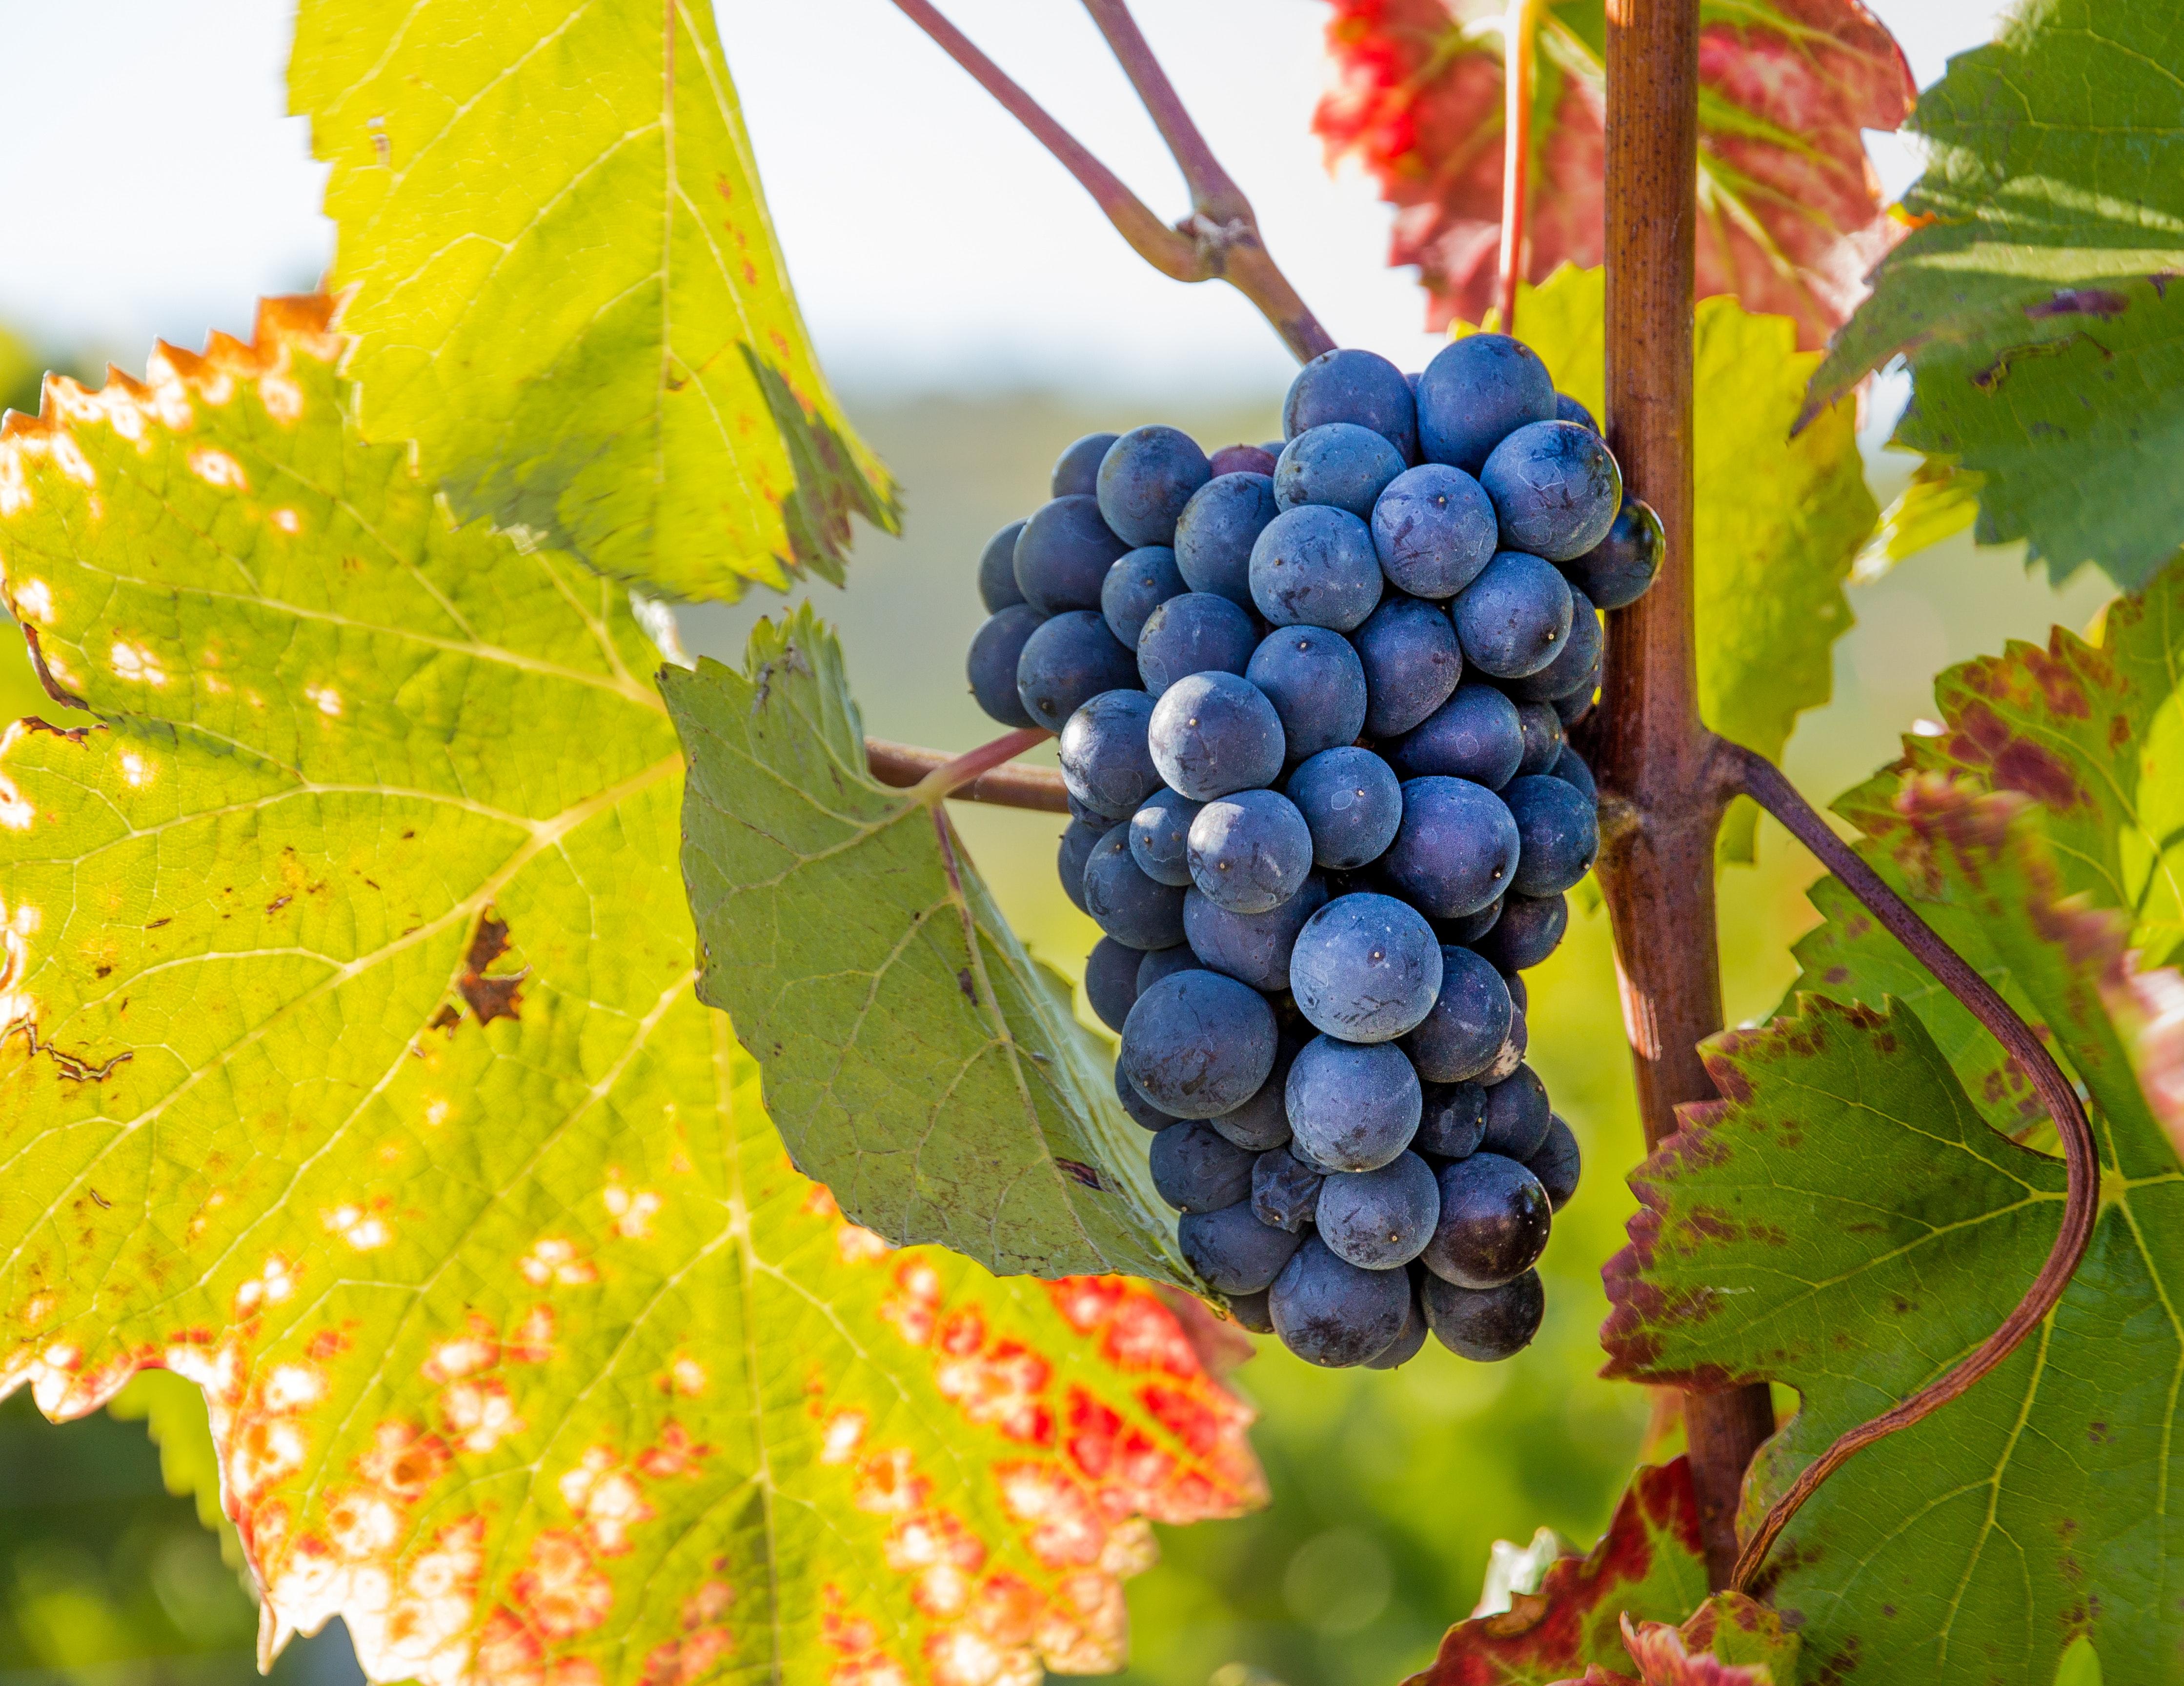 How To Grow Grapes From Store Bought Grapes 